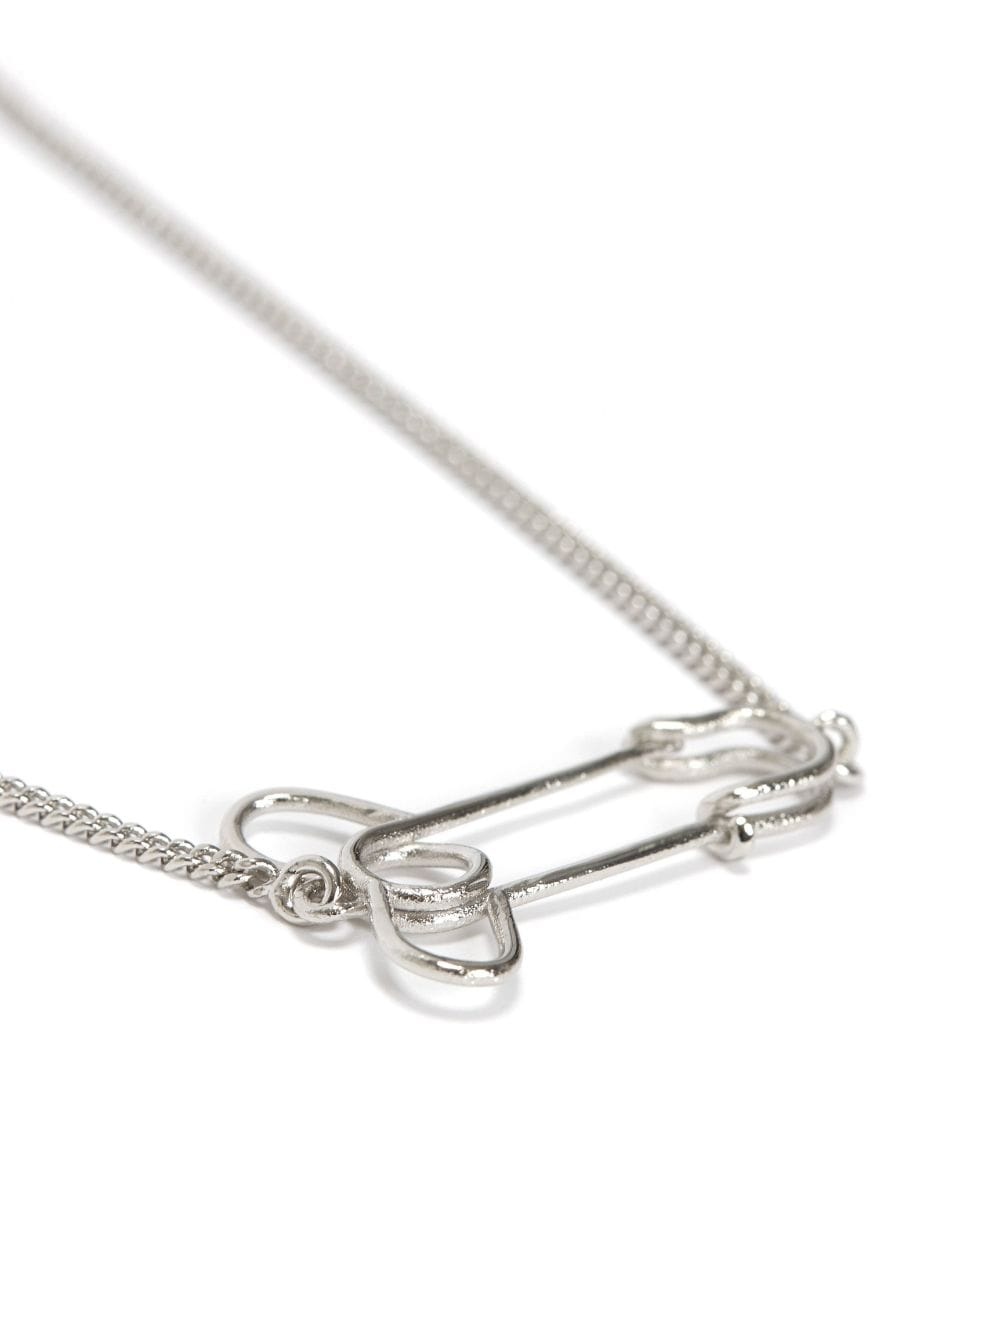 safety-pin pendant necklace - 3